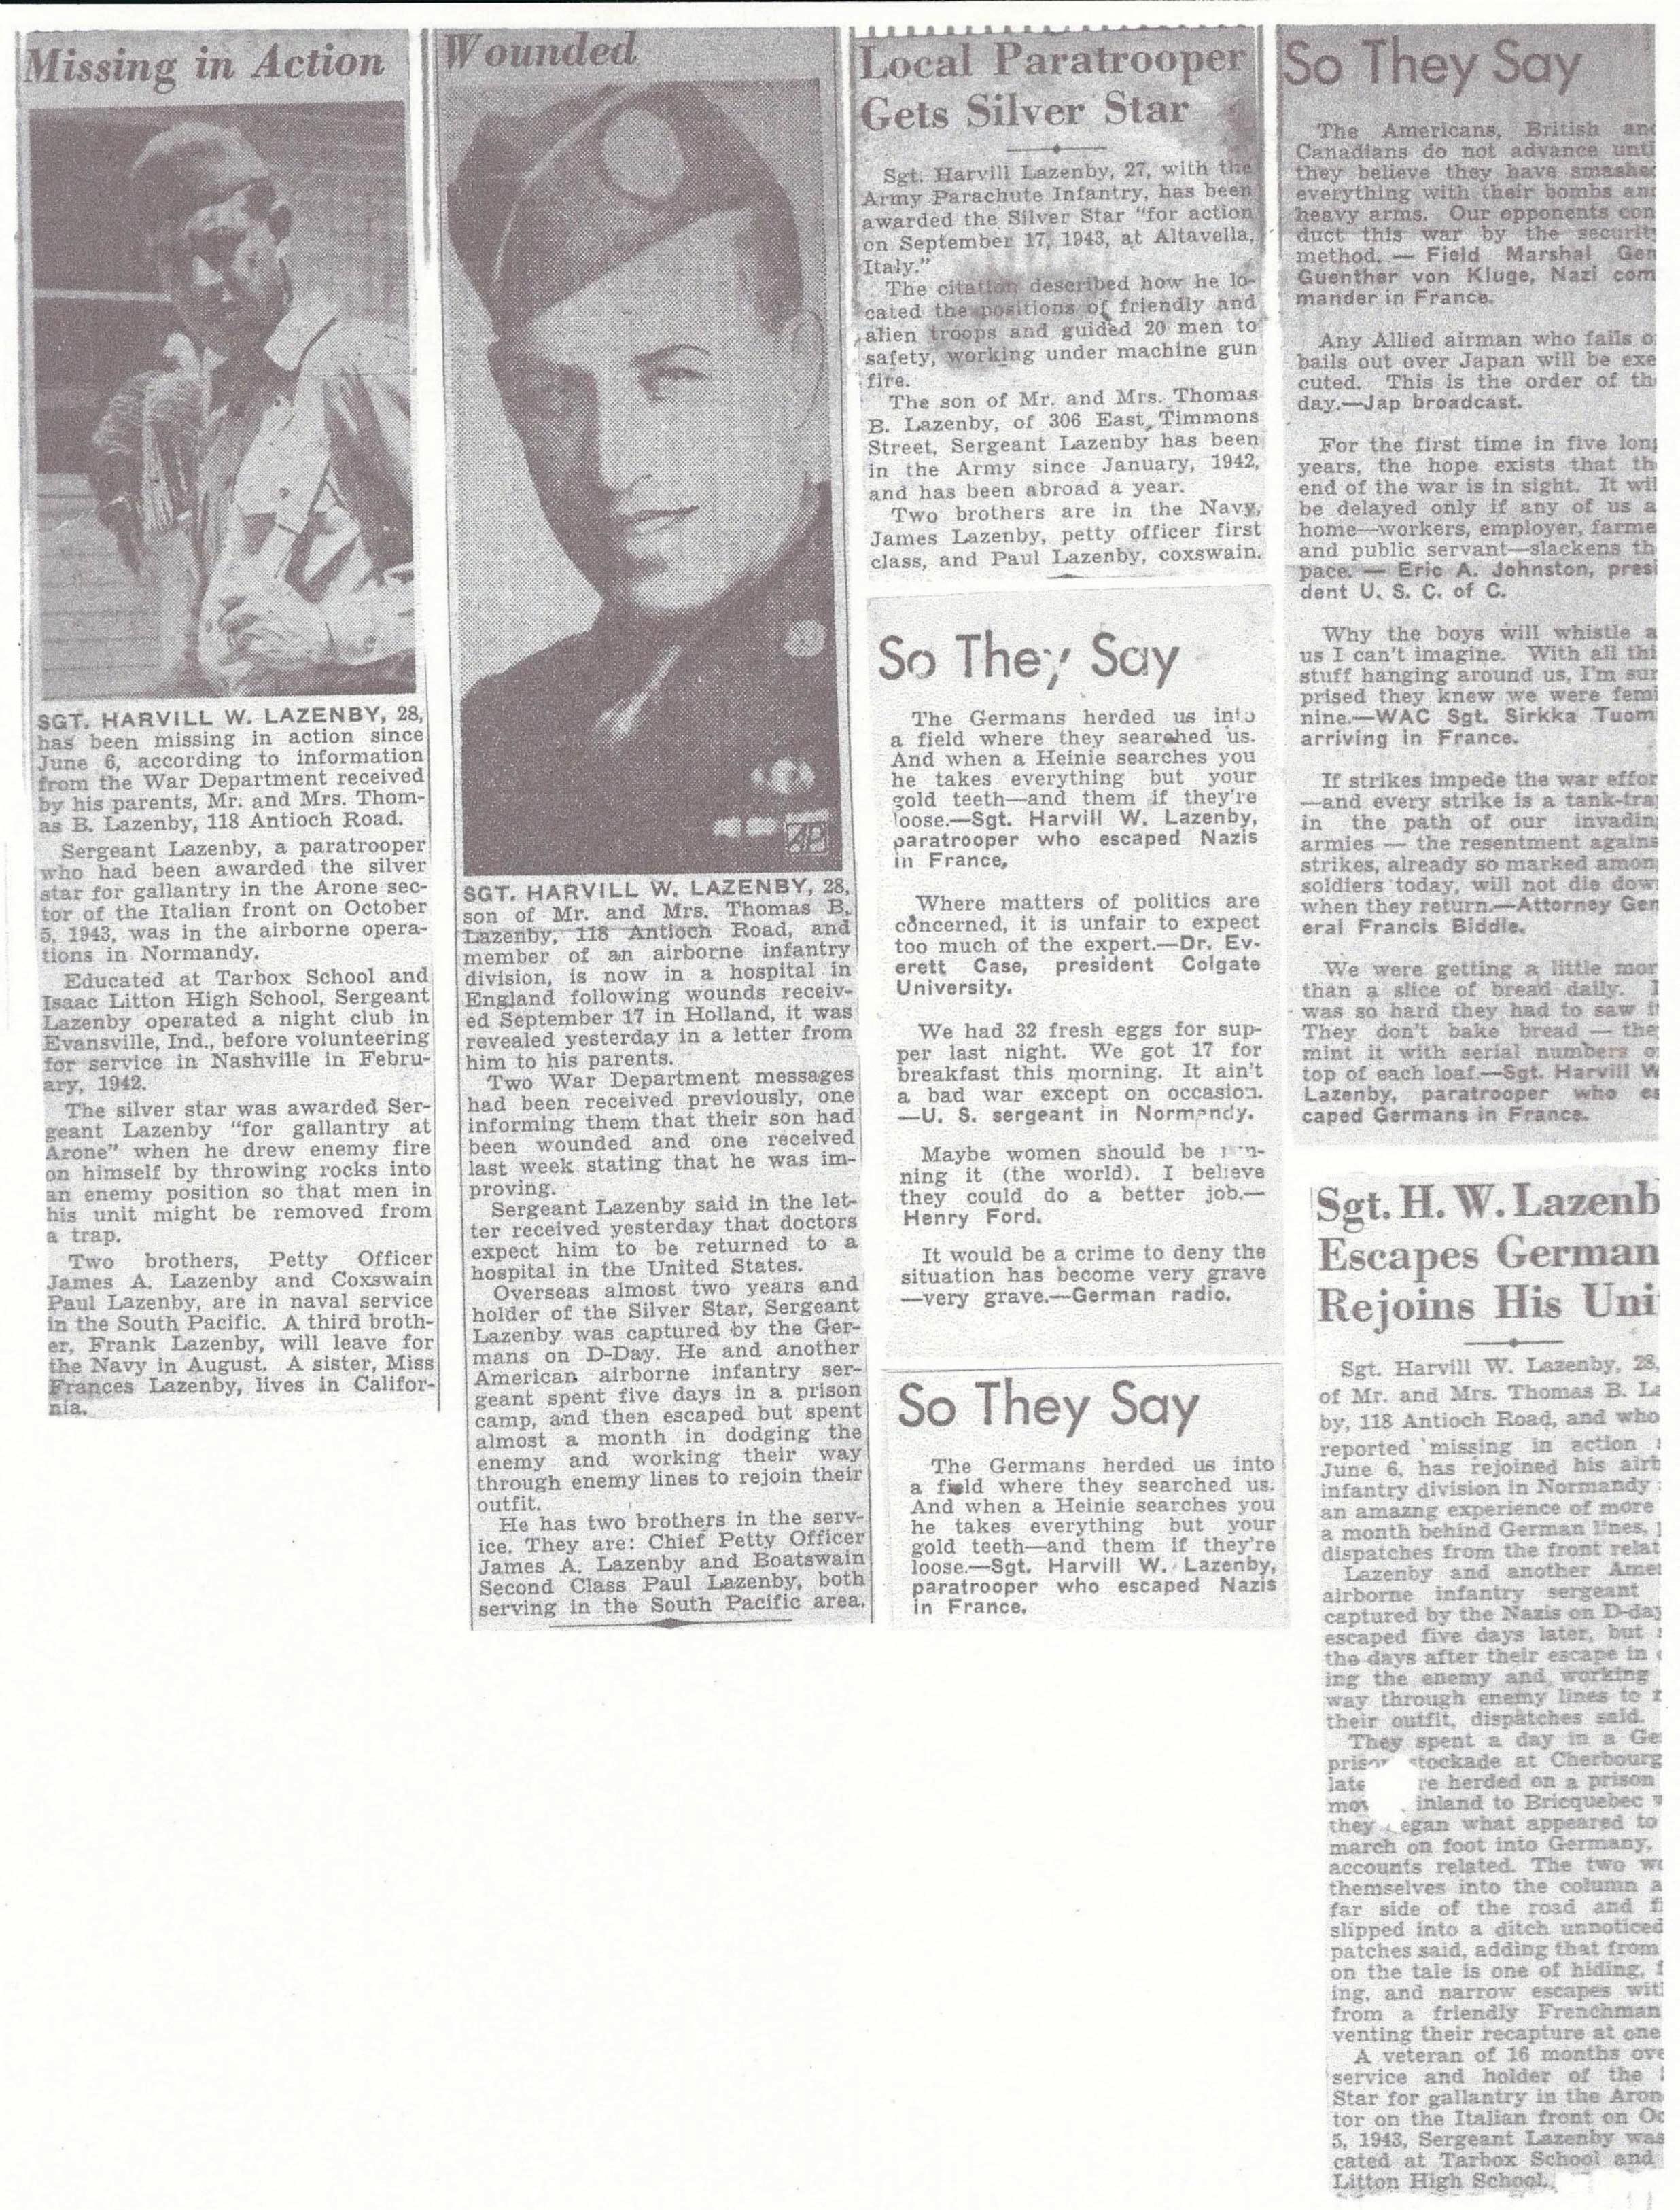 Sgt. Lazenby news clippings